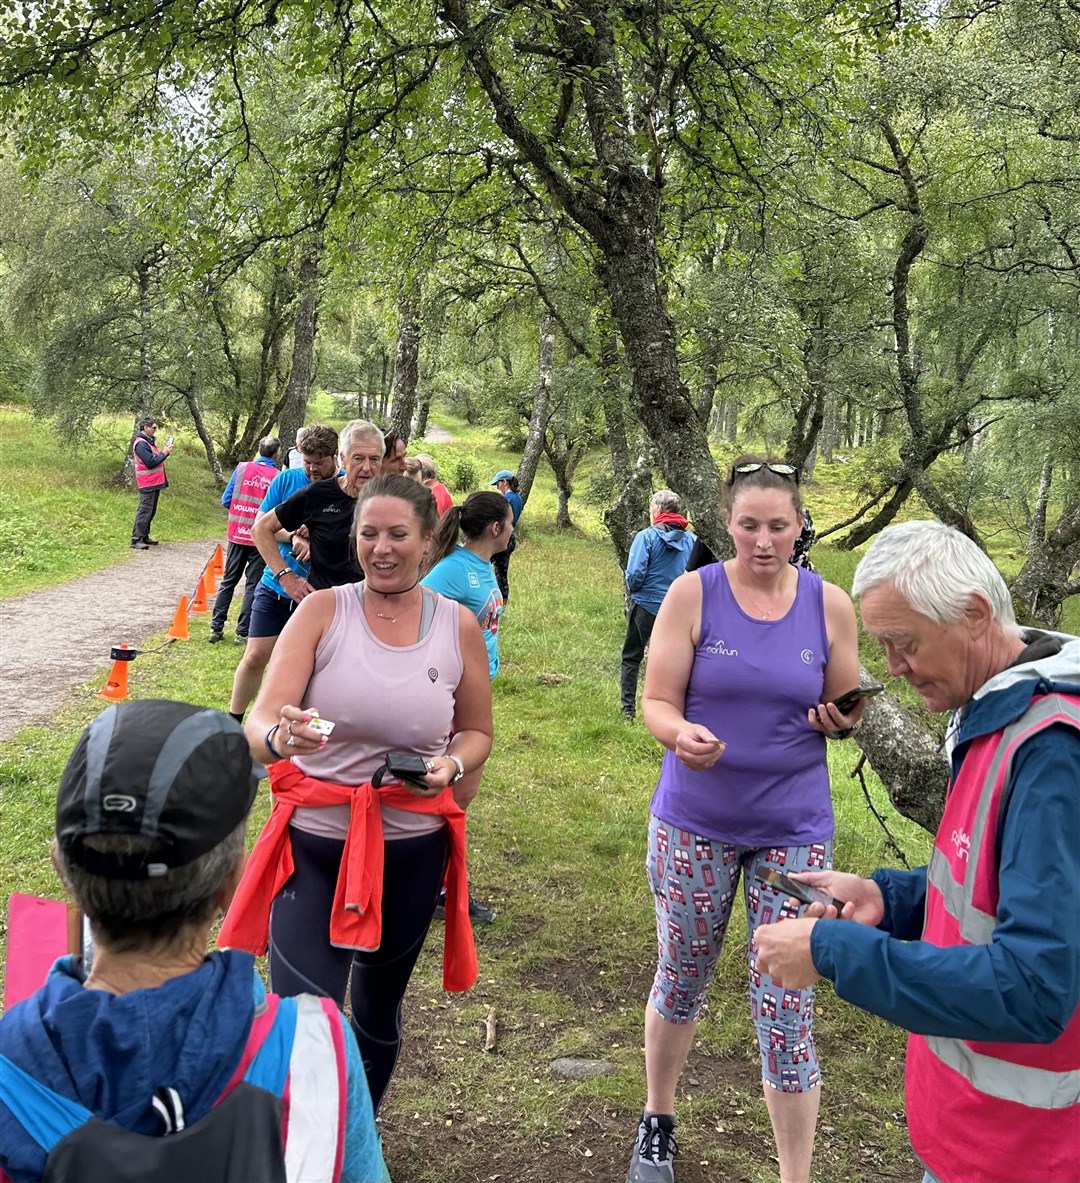 Local parkrunner Ashleigh Robertson and Amanda Harkai in the queue waiting to have their finish tokens and barcodes scanned by regular volunteers Val Machin and Malcolm Hinsley.